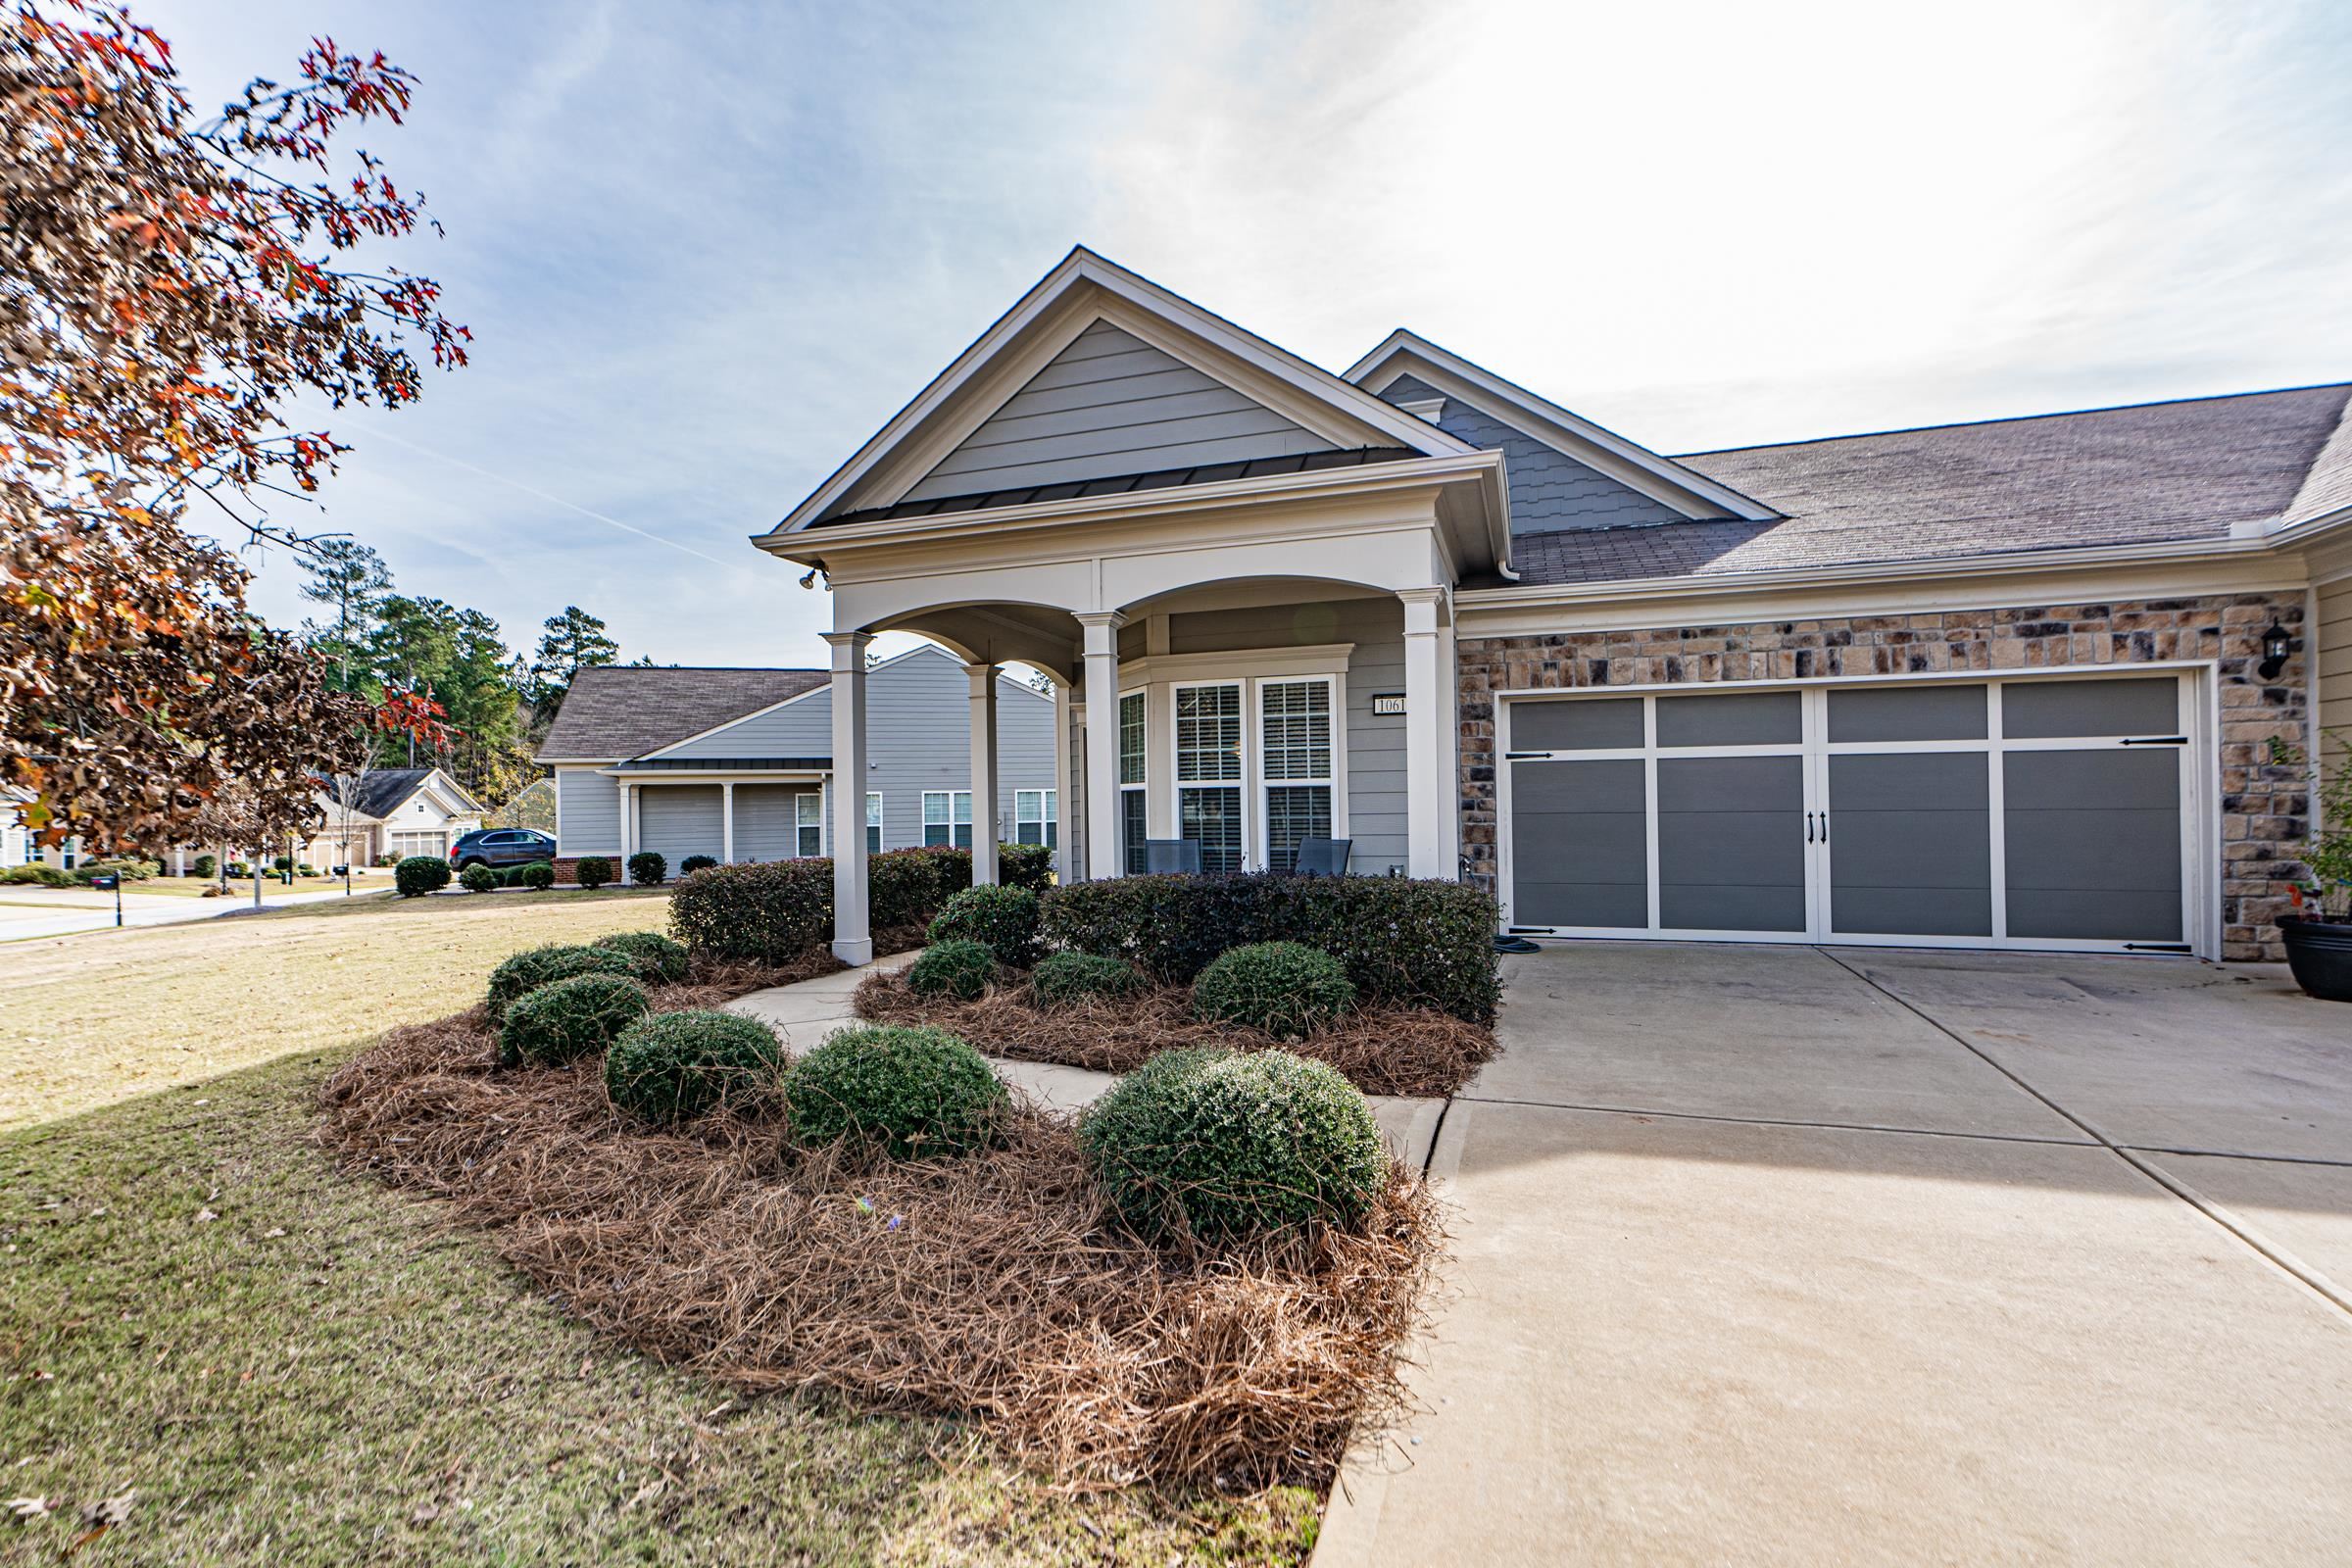 This sweet 2 Bedroom Villa in Del Webb at Lake Oconee is close and convenient to every amenity (Publix, St. Mary's Hospital, I-20, restaurants, golf courses, entertainment, banks, churches, and doctor's offices).  The HOA and Community Fees are all inclusive.  This Villa has a cute screened in porch, a 2 car garage, 2 spacious bedrooms, and is all on one level.  Act quickly!...these are highly sought after and it won't last long!  Call Jen with Kim and Lin Logan Real Estate at 706-817-1020.